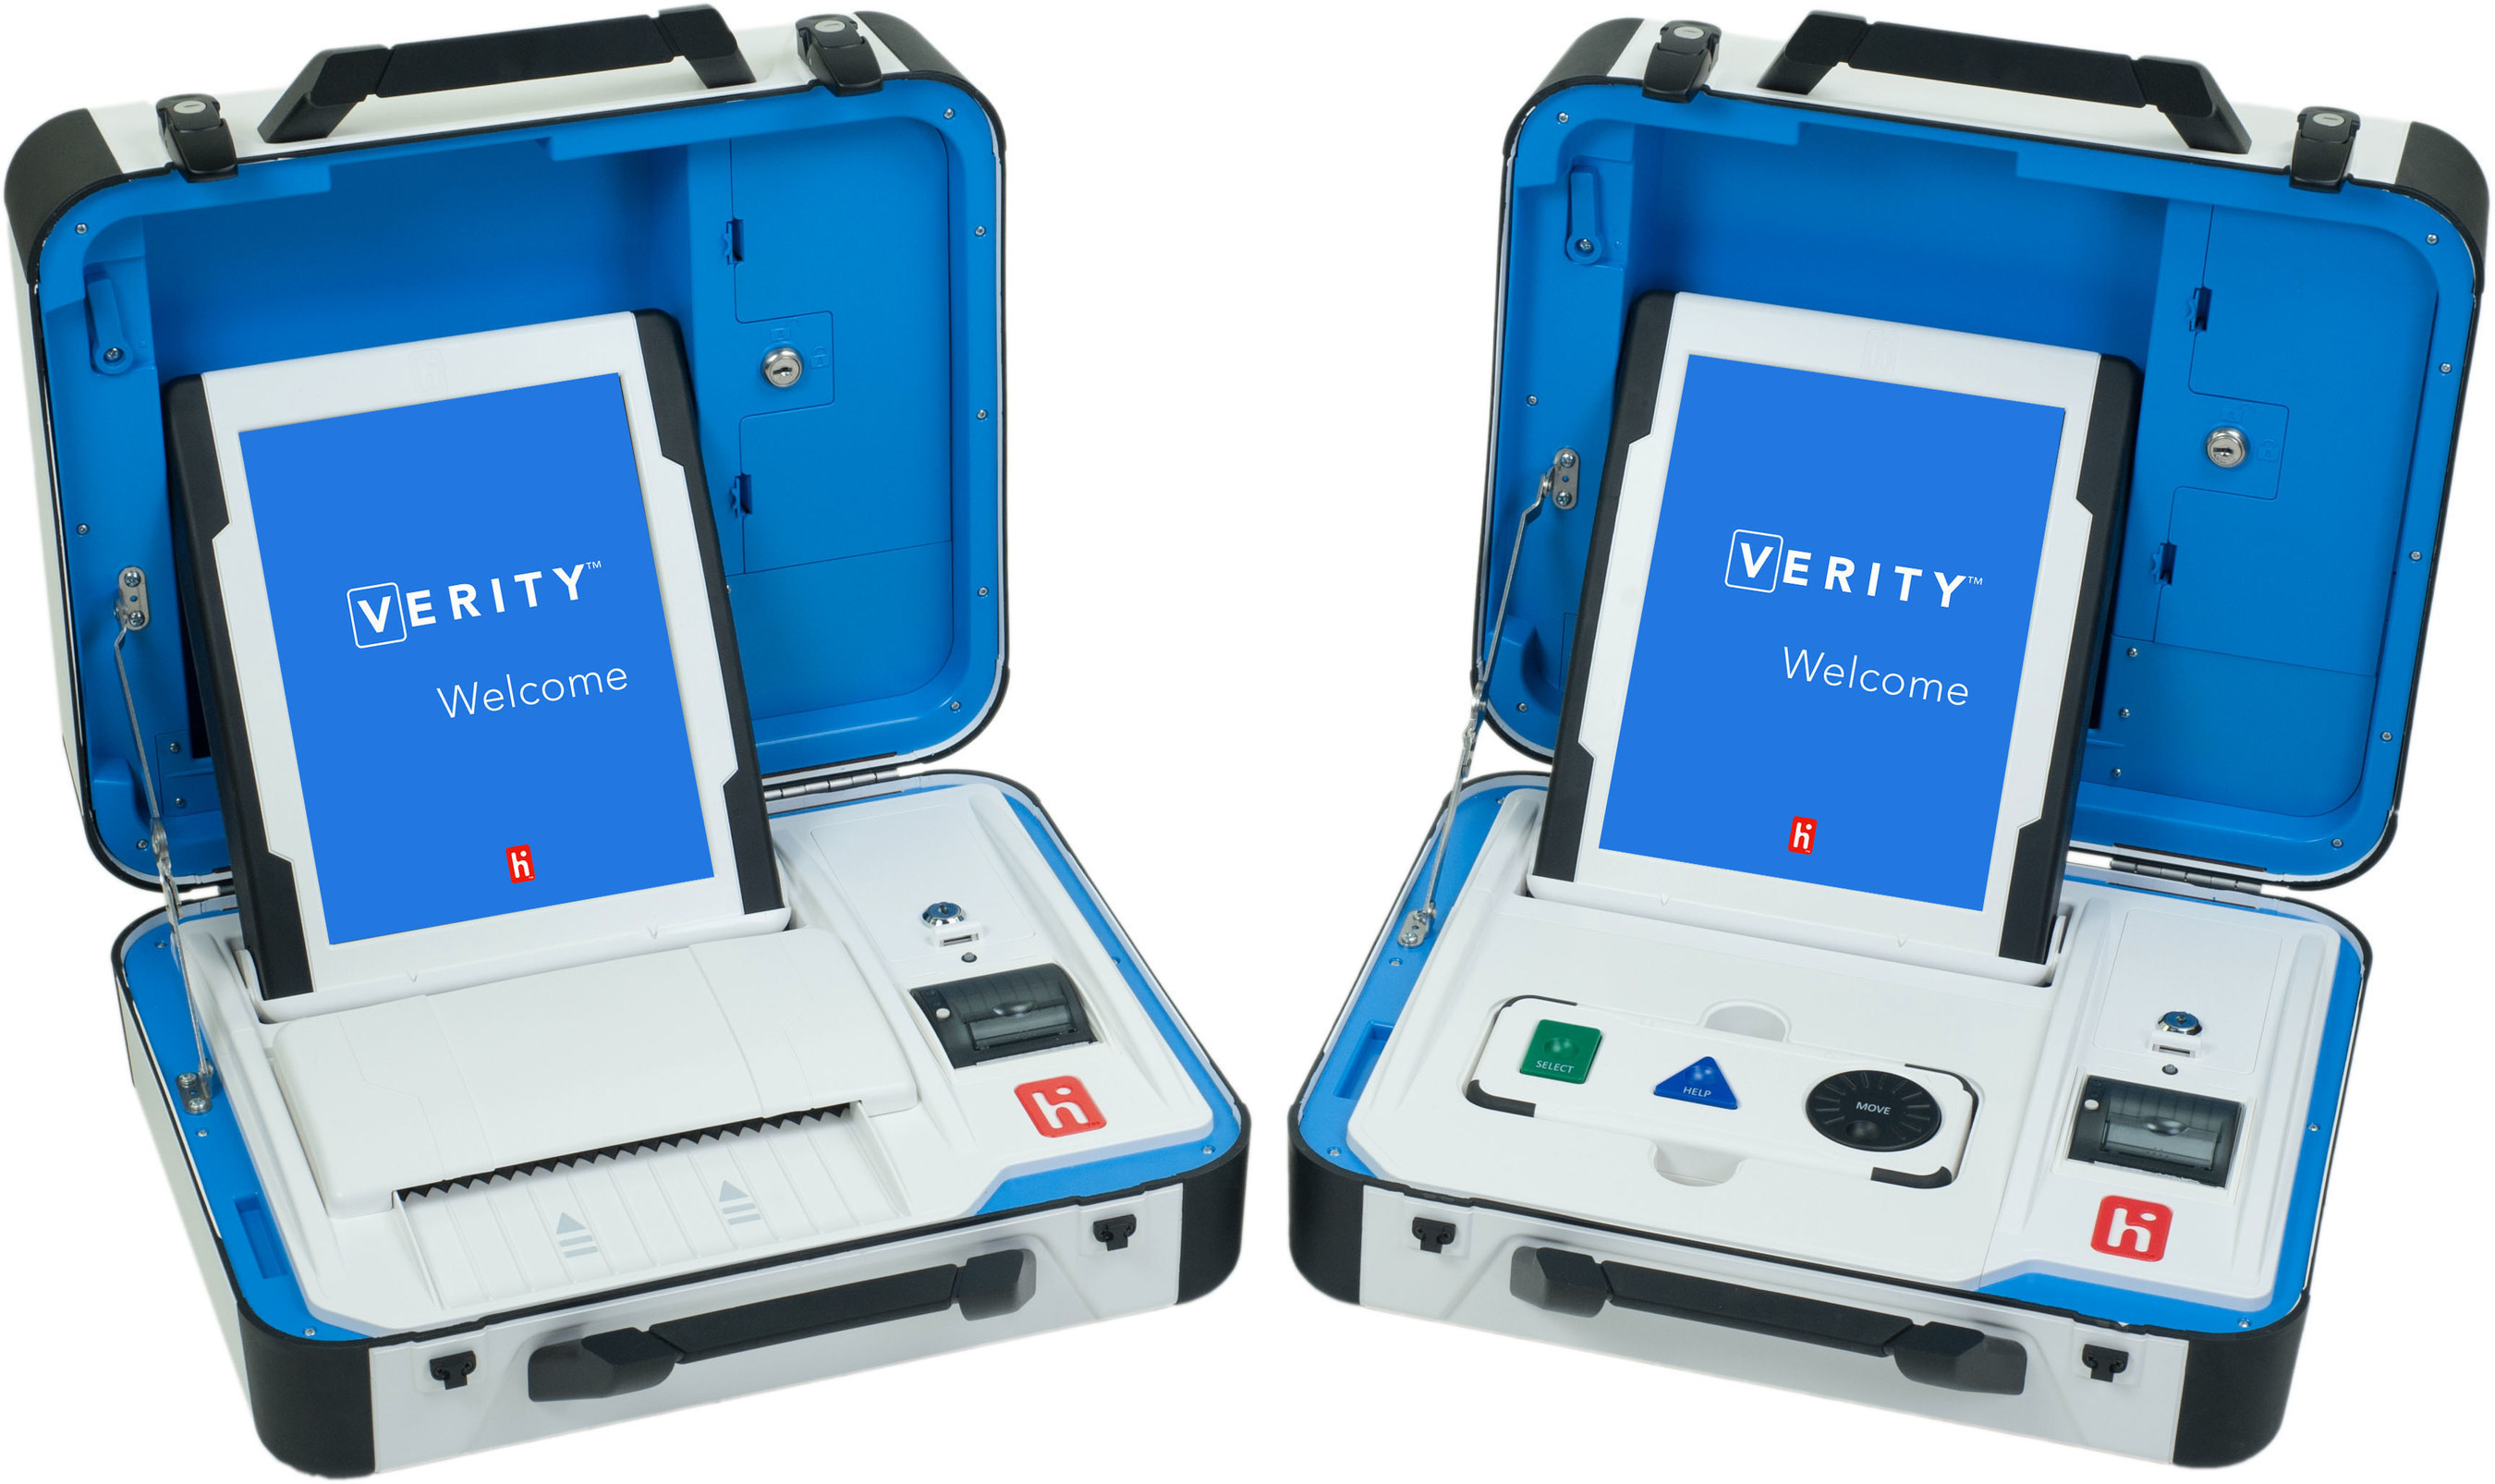 Verity's compact, secure polling place devices make setup straightforward and voting easy.